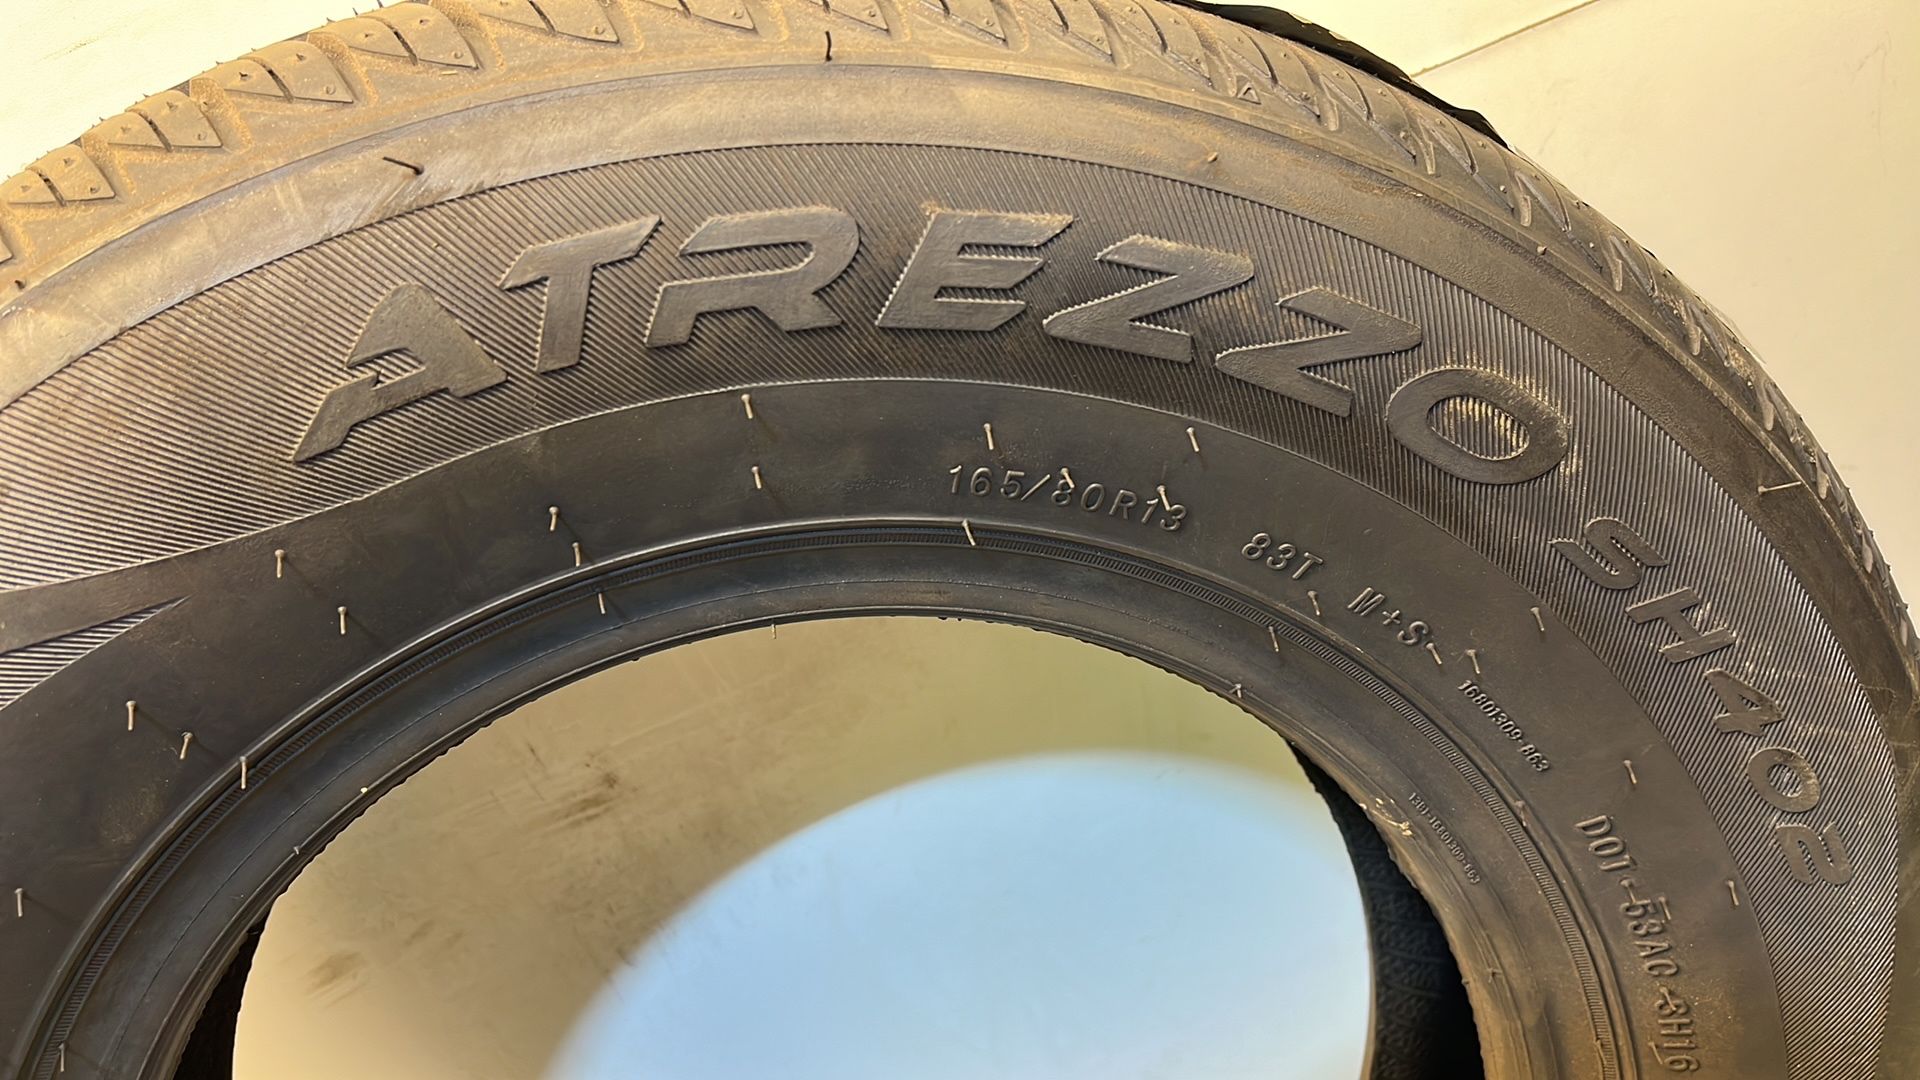 Sailun | Aterzzo SH402 | 165/80/R13 Tyre - Image 5 of 6